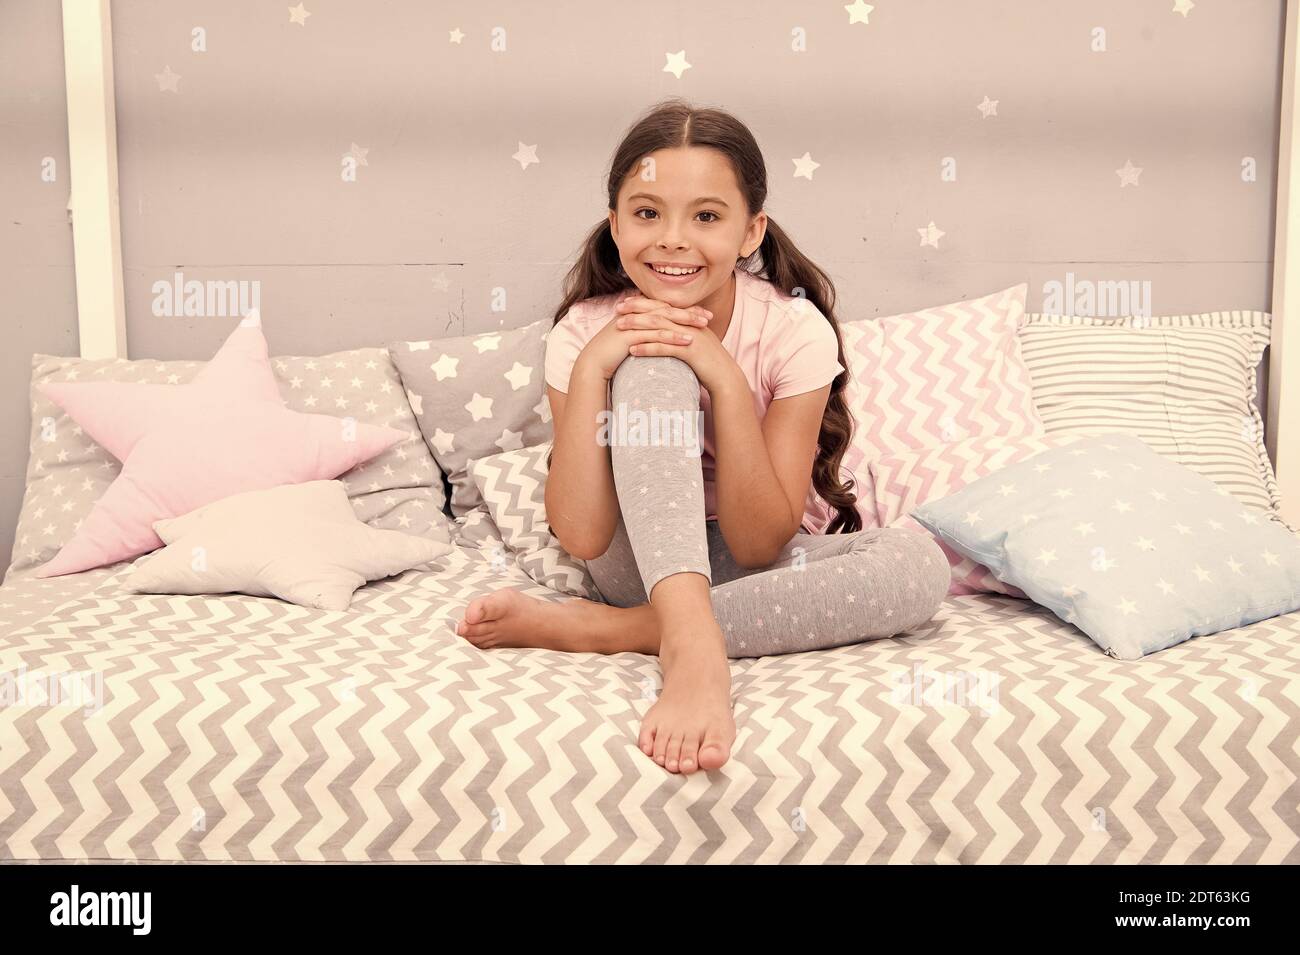 Comfortable and cozy. Little child feel comfortable at home. Small girl sit in bed. Cute kid wear comfortable pajamas. Comfortable home atmosphere. Bedtime routine. Home clothing. Fashion and beauty. Stock Photo